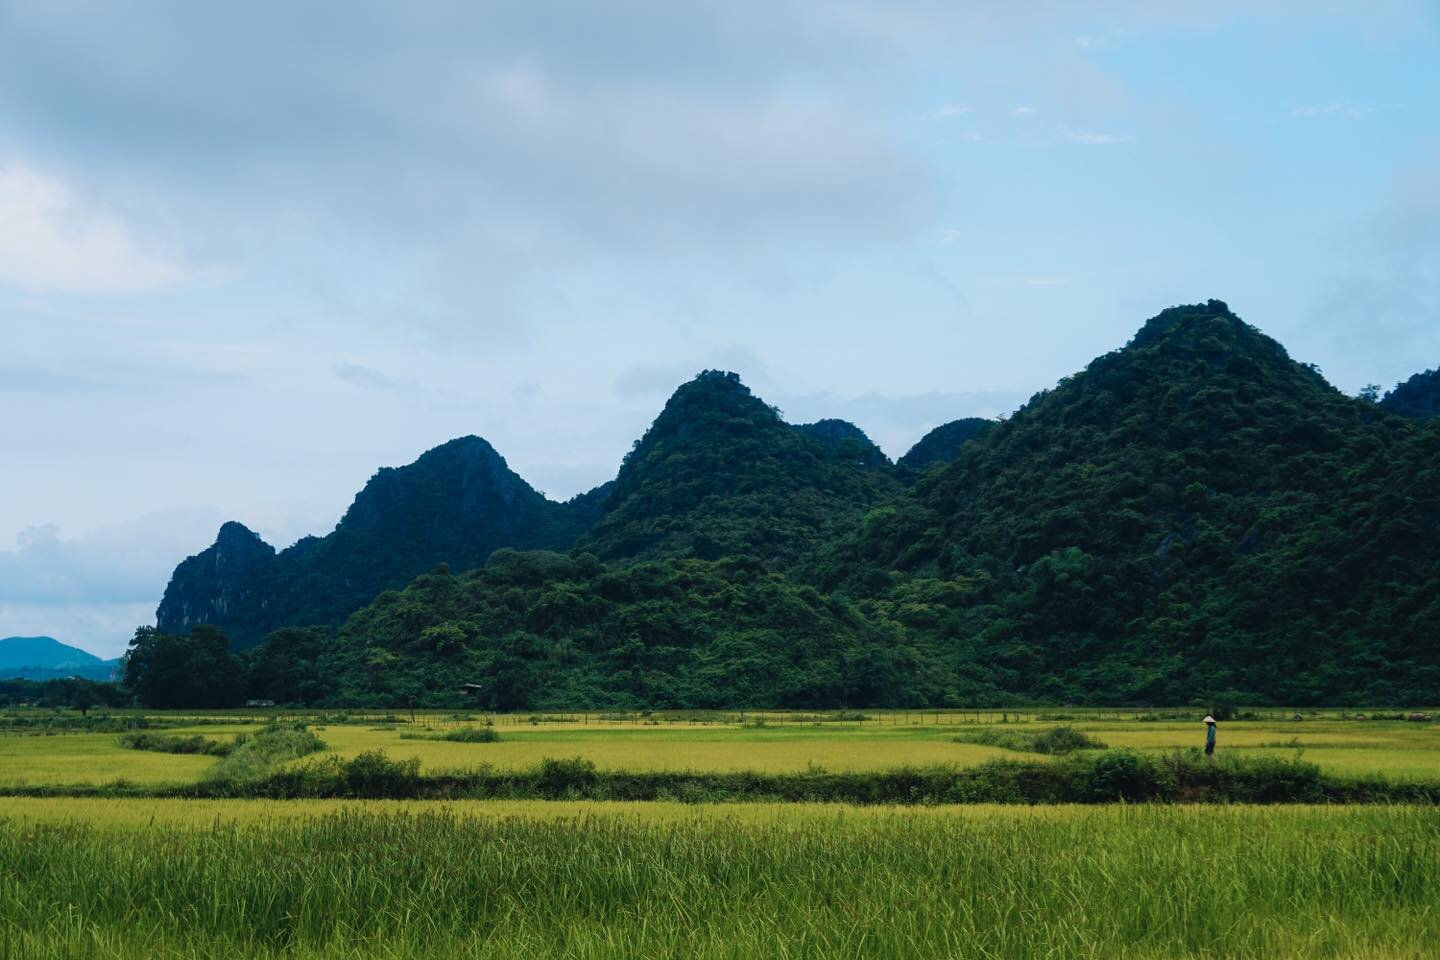 This region of Vietnam is one of my favorite places in the whole country. 

The land here feels otherworldly, limestone karsts rise high into the air and they surround you on all sides. Flowing rivers and roads, lush rice paddies and a quiet pace of 